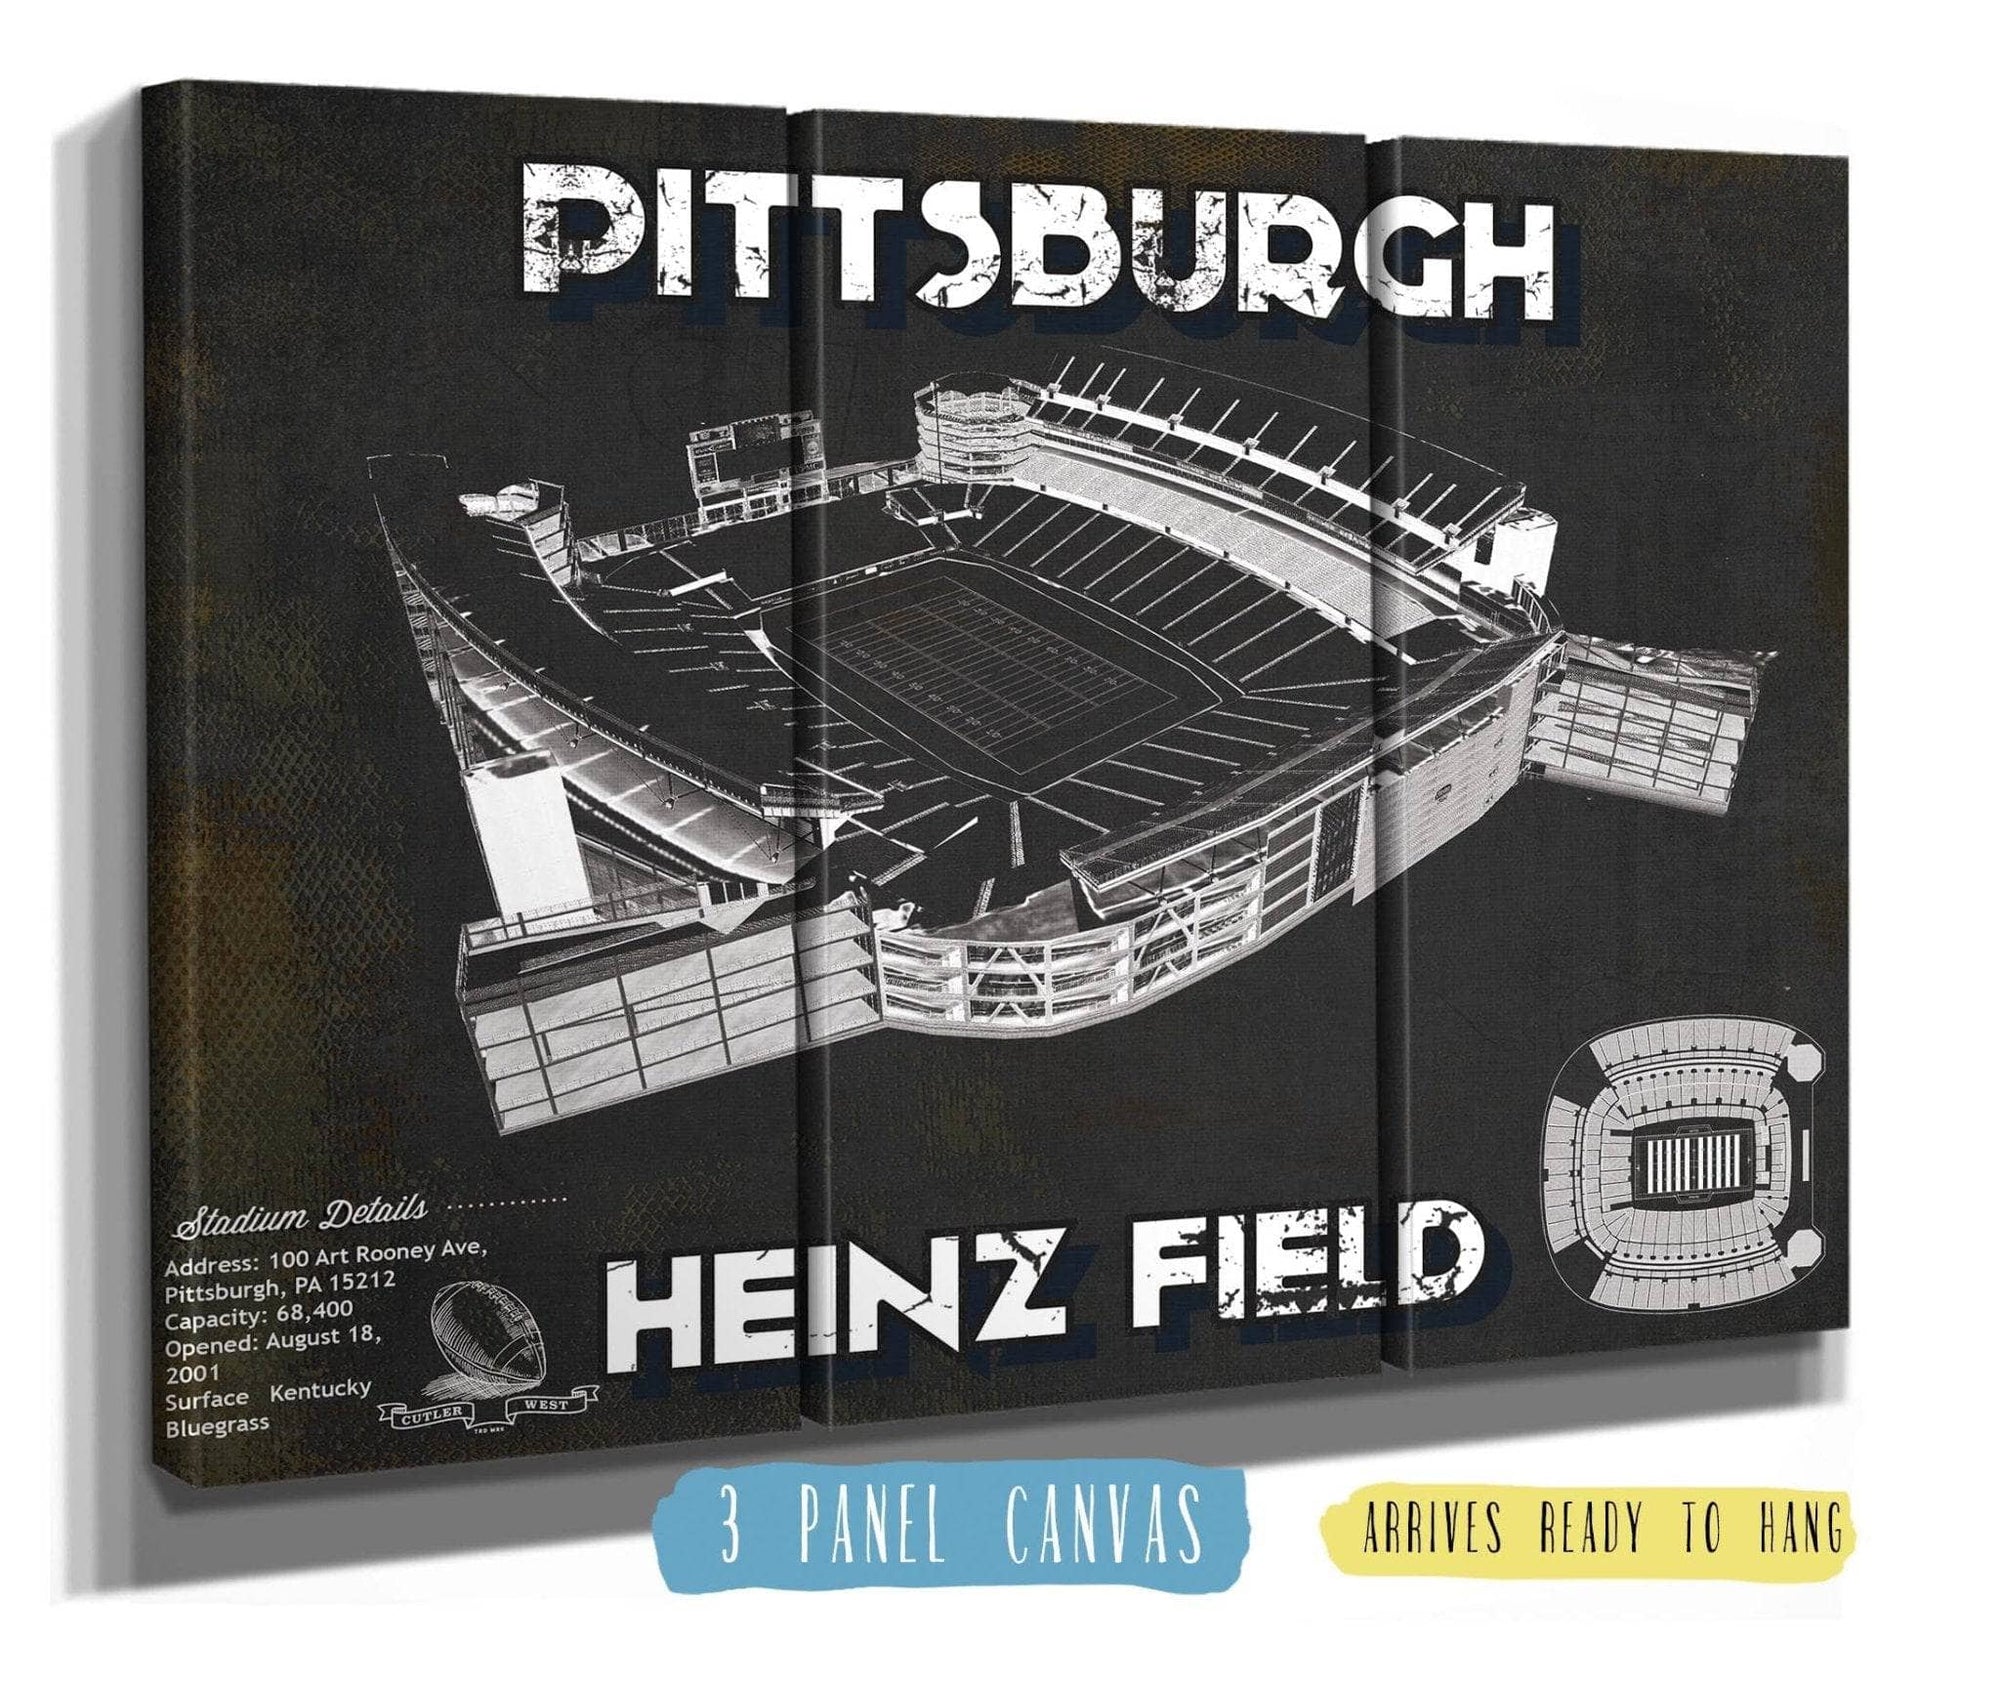 Cutler West Pro Football Collection 48" x 32" / 3 Panel Canvas Wrap Pittsburgh Steelers Stadium Art Team Color- Heinz Field - Vintage Football Print 235353076